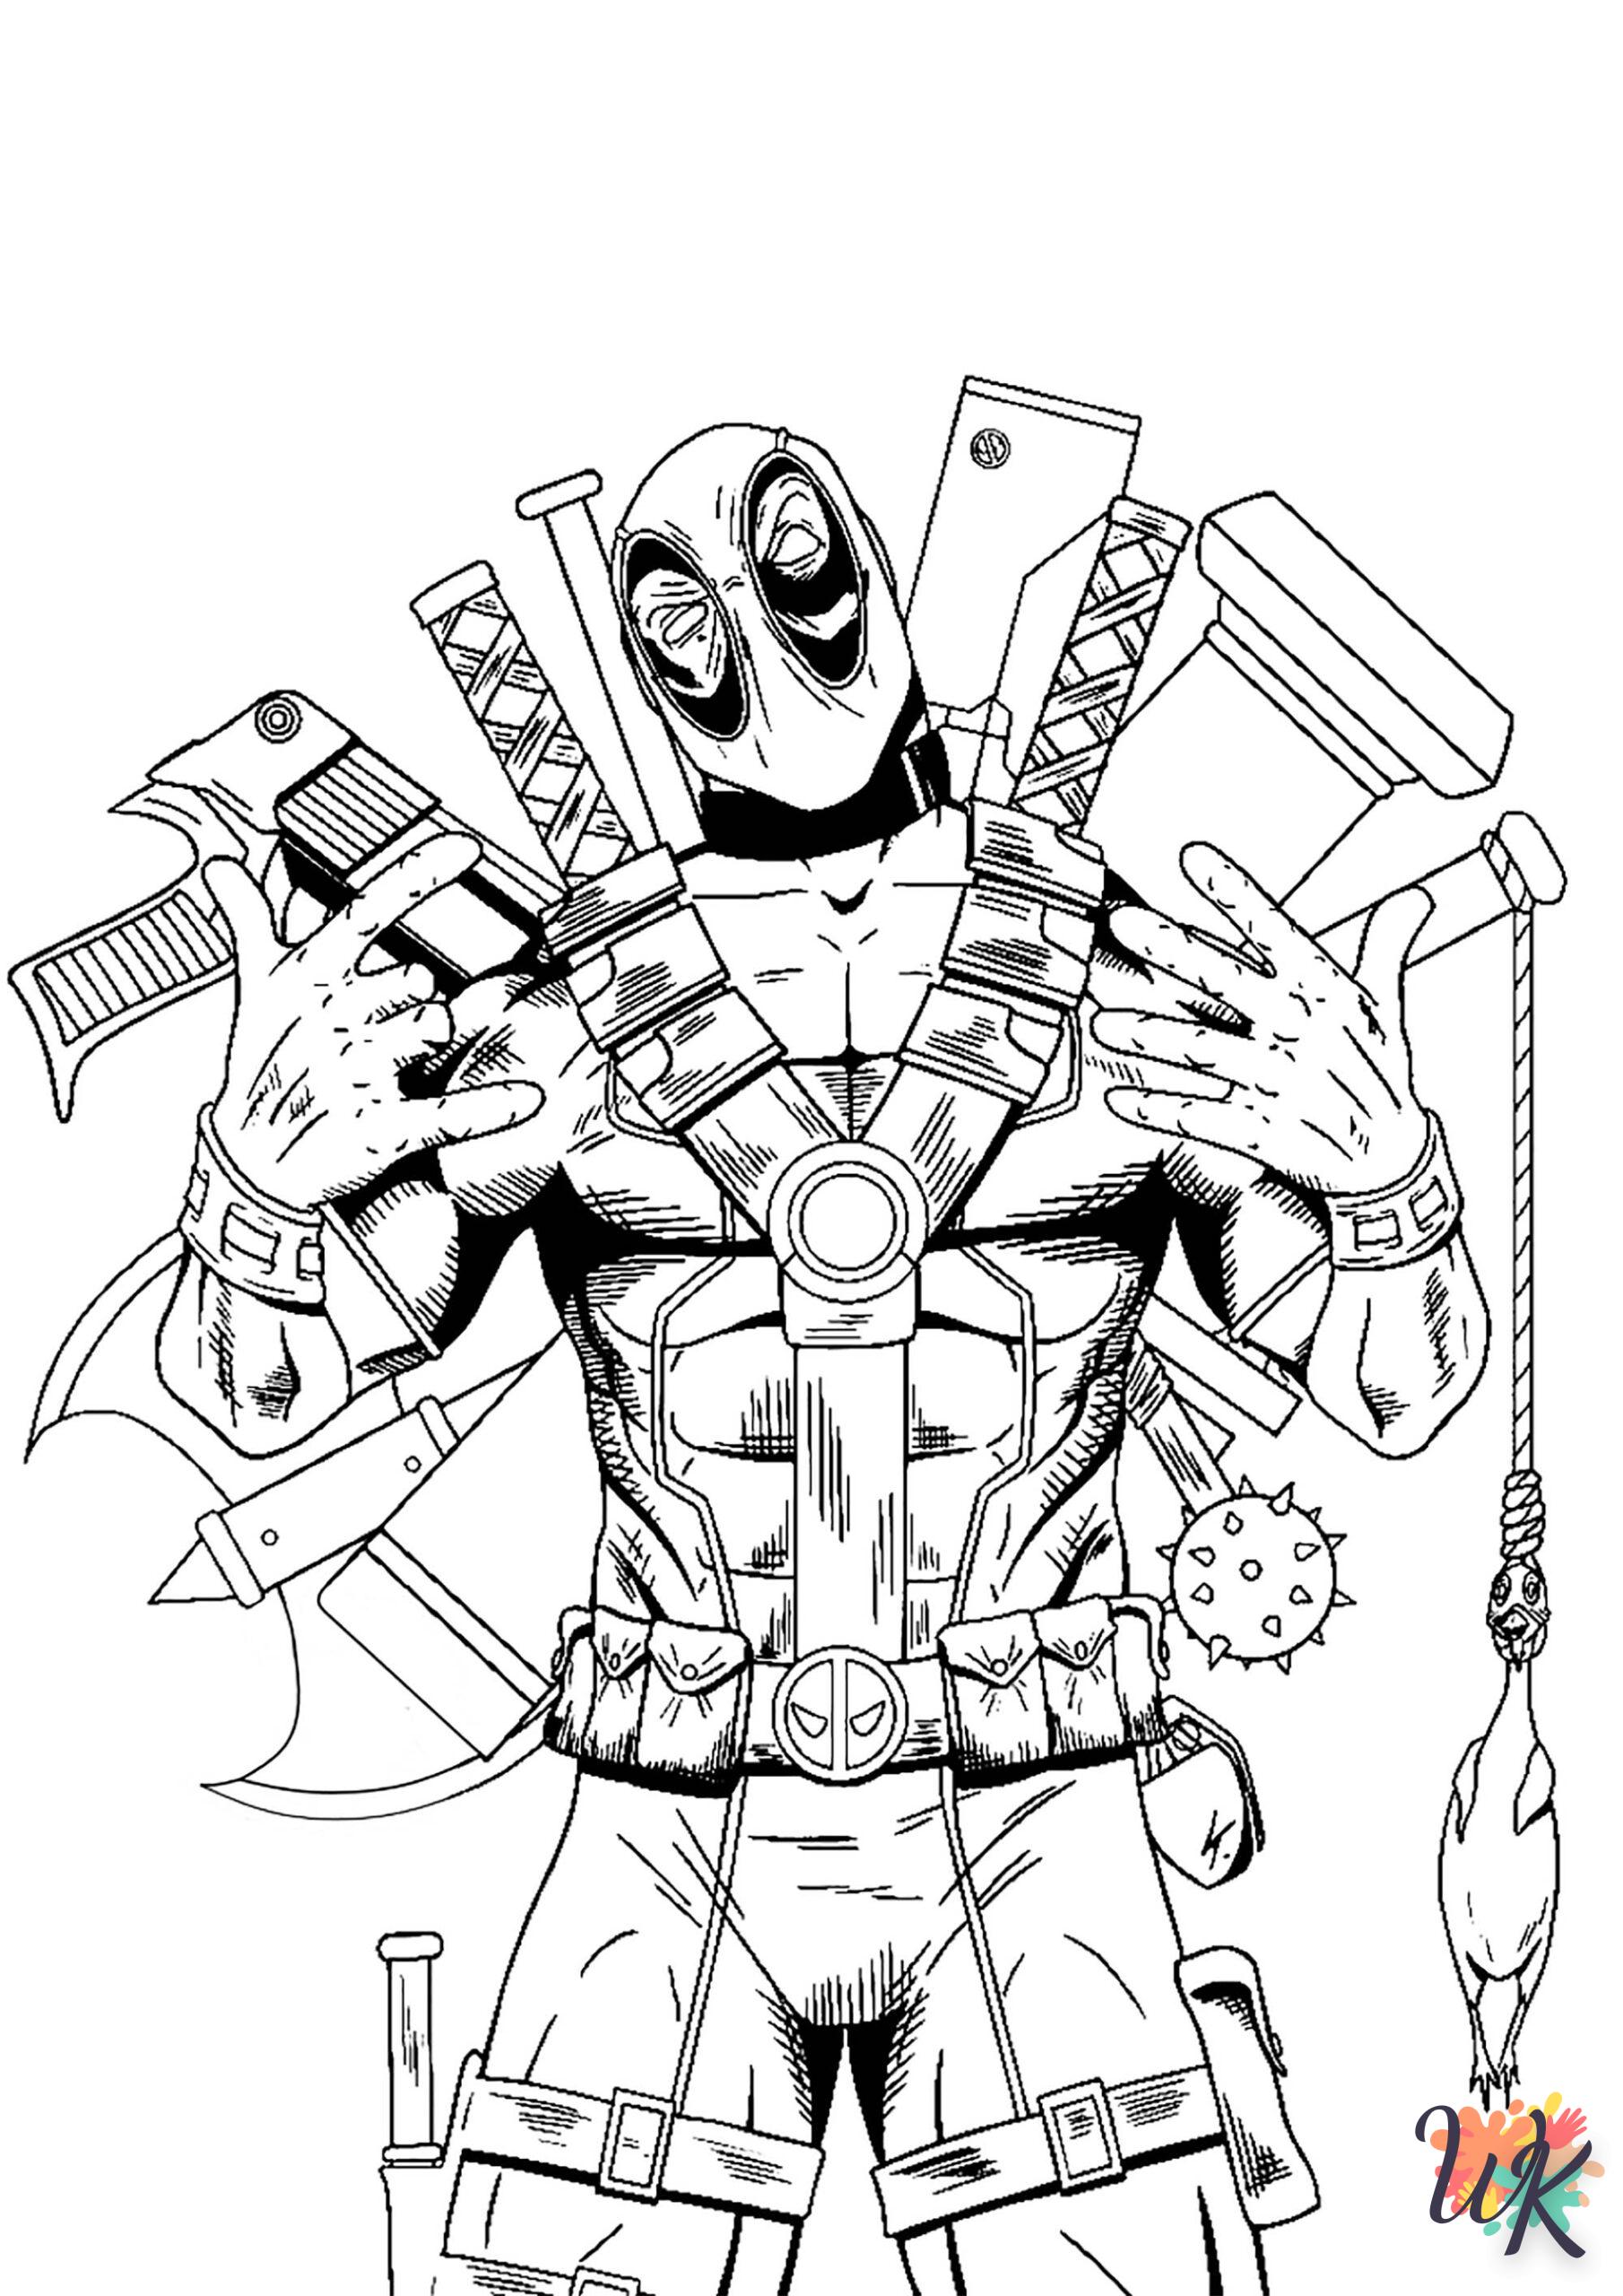 Superhero coloring pages for adults